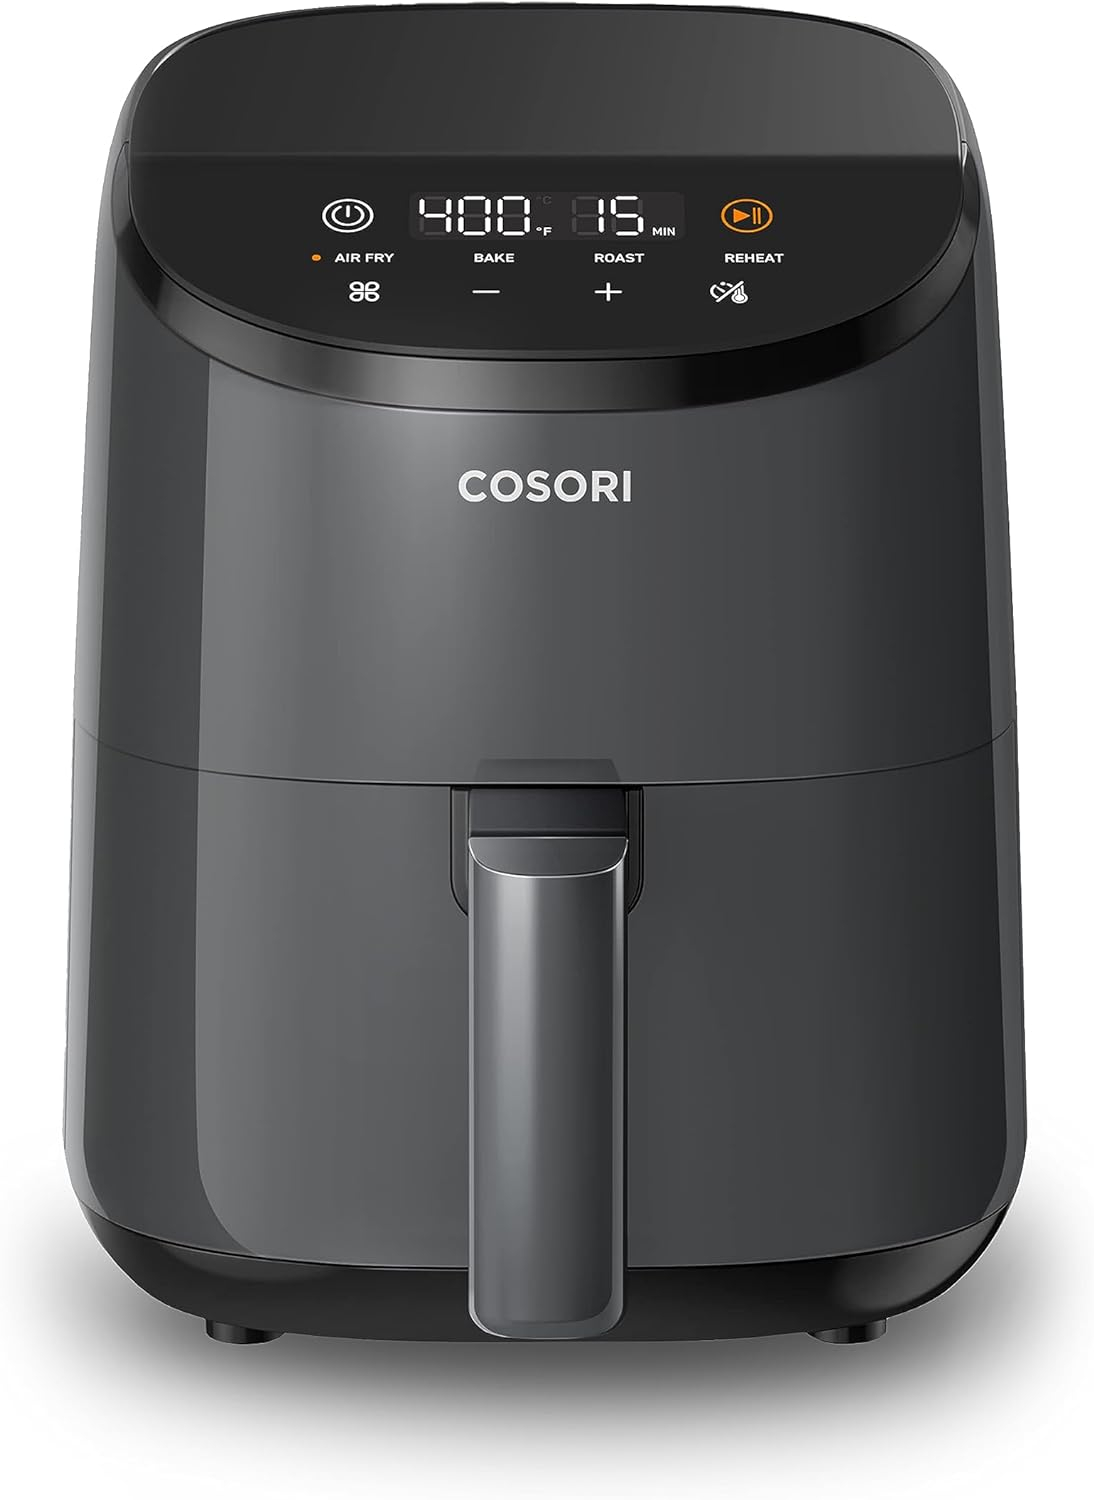 COSORI Small Air Fryer Oven 2.1 Qt, 4-in-1 Mini Airfryer, Bake, Roast, Reheat, Space-saving  Low-noise, Nonstick and Dishwasher Safe Basket, 30 In-App Recipes, Sticker with 6 Reference Guides,Grey